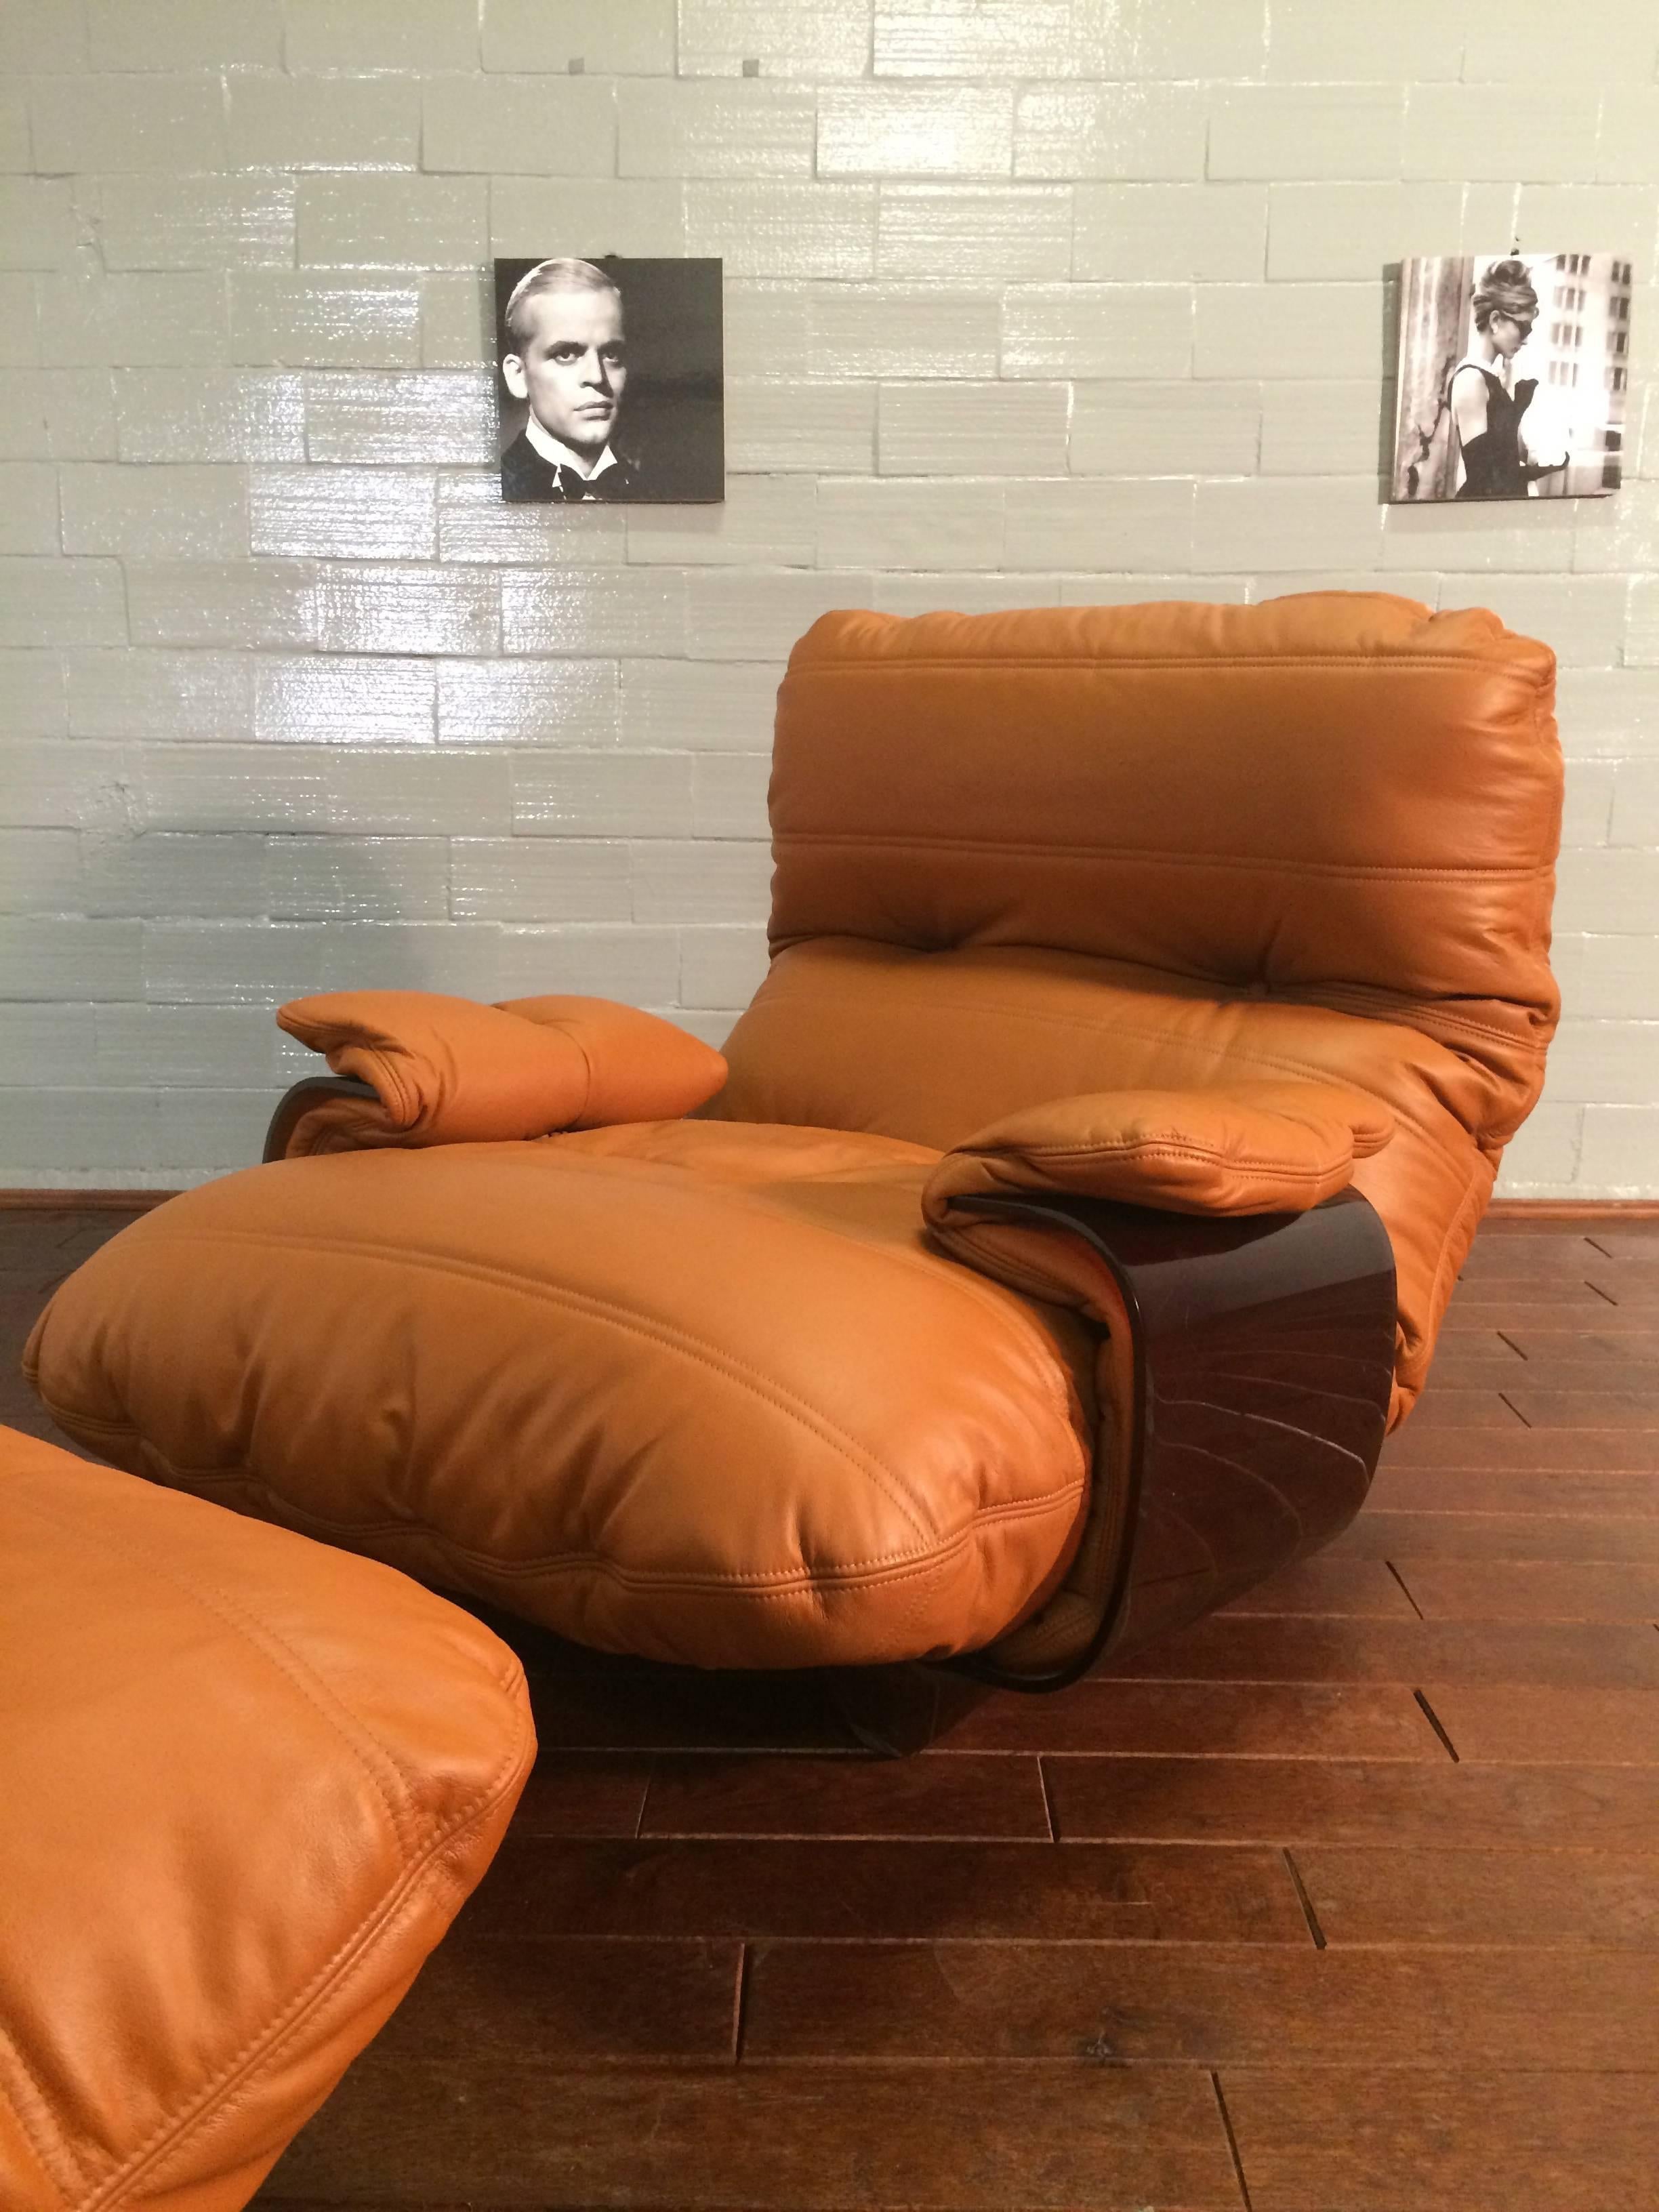 This Marsala lounge chair and pouf were designed by Michel Ducaroy in the 1960s and were manufactured by Ligne Roset in France during the 1970s. They have been reupholstered in genuine cognac leather and each feature the original Ligne Roset logo.